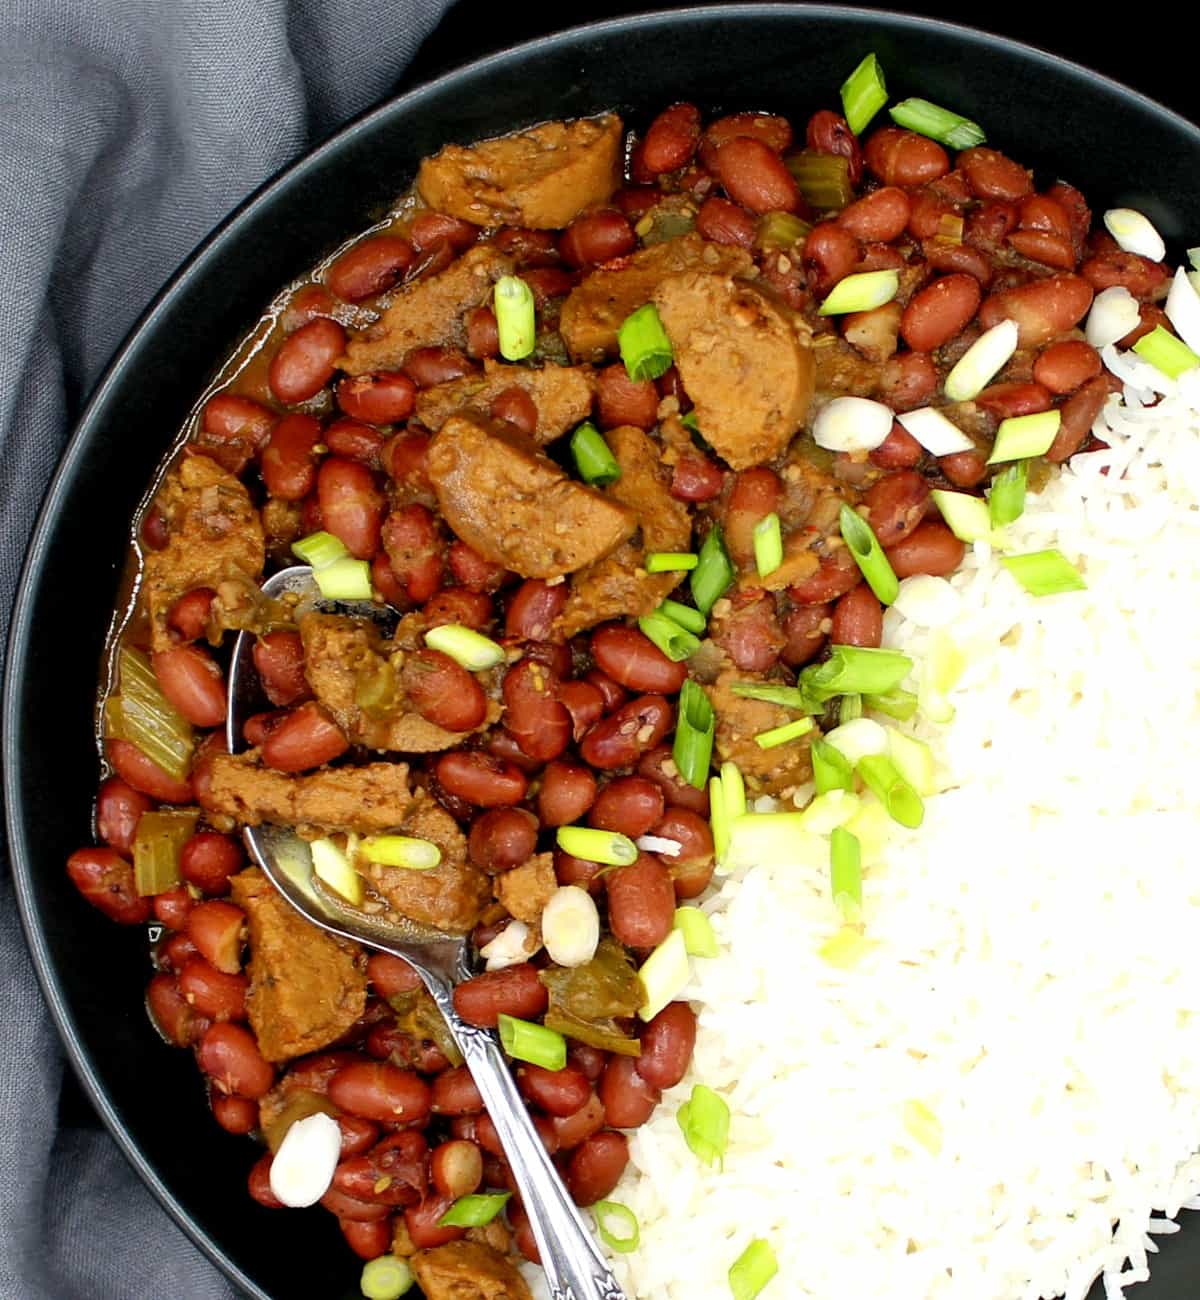 Photo of vegan red beans and rice garnished with scaliions in a black bowl with a decorative spoon against a gray napkin